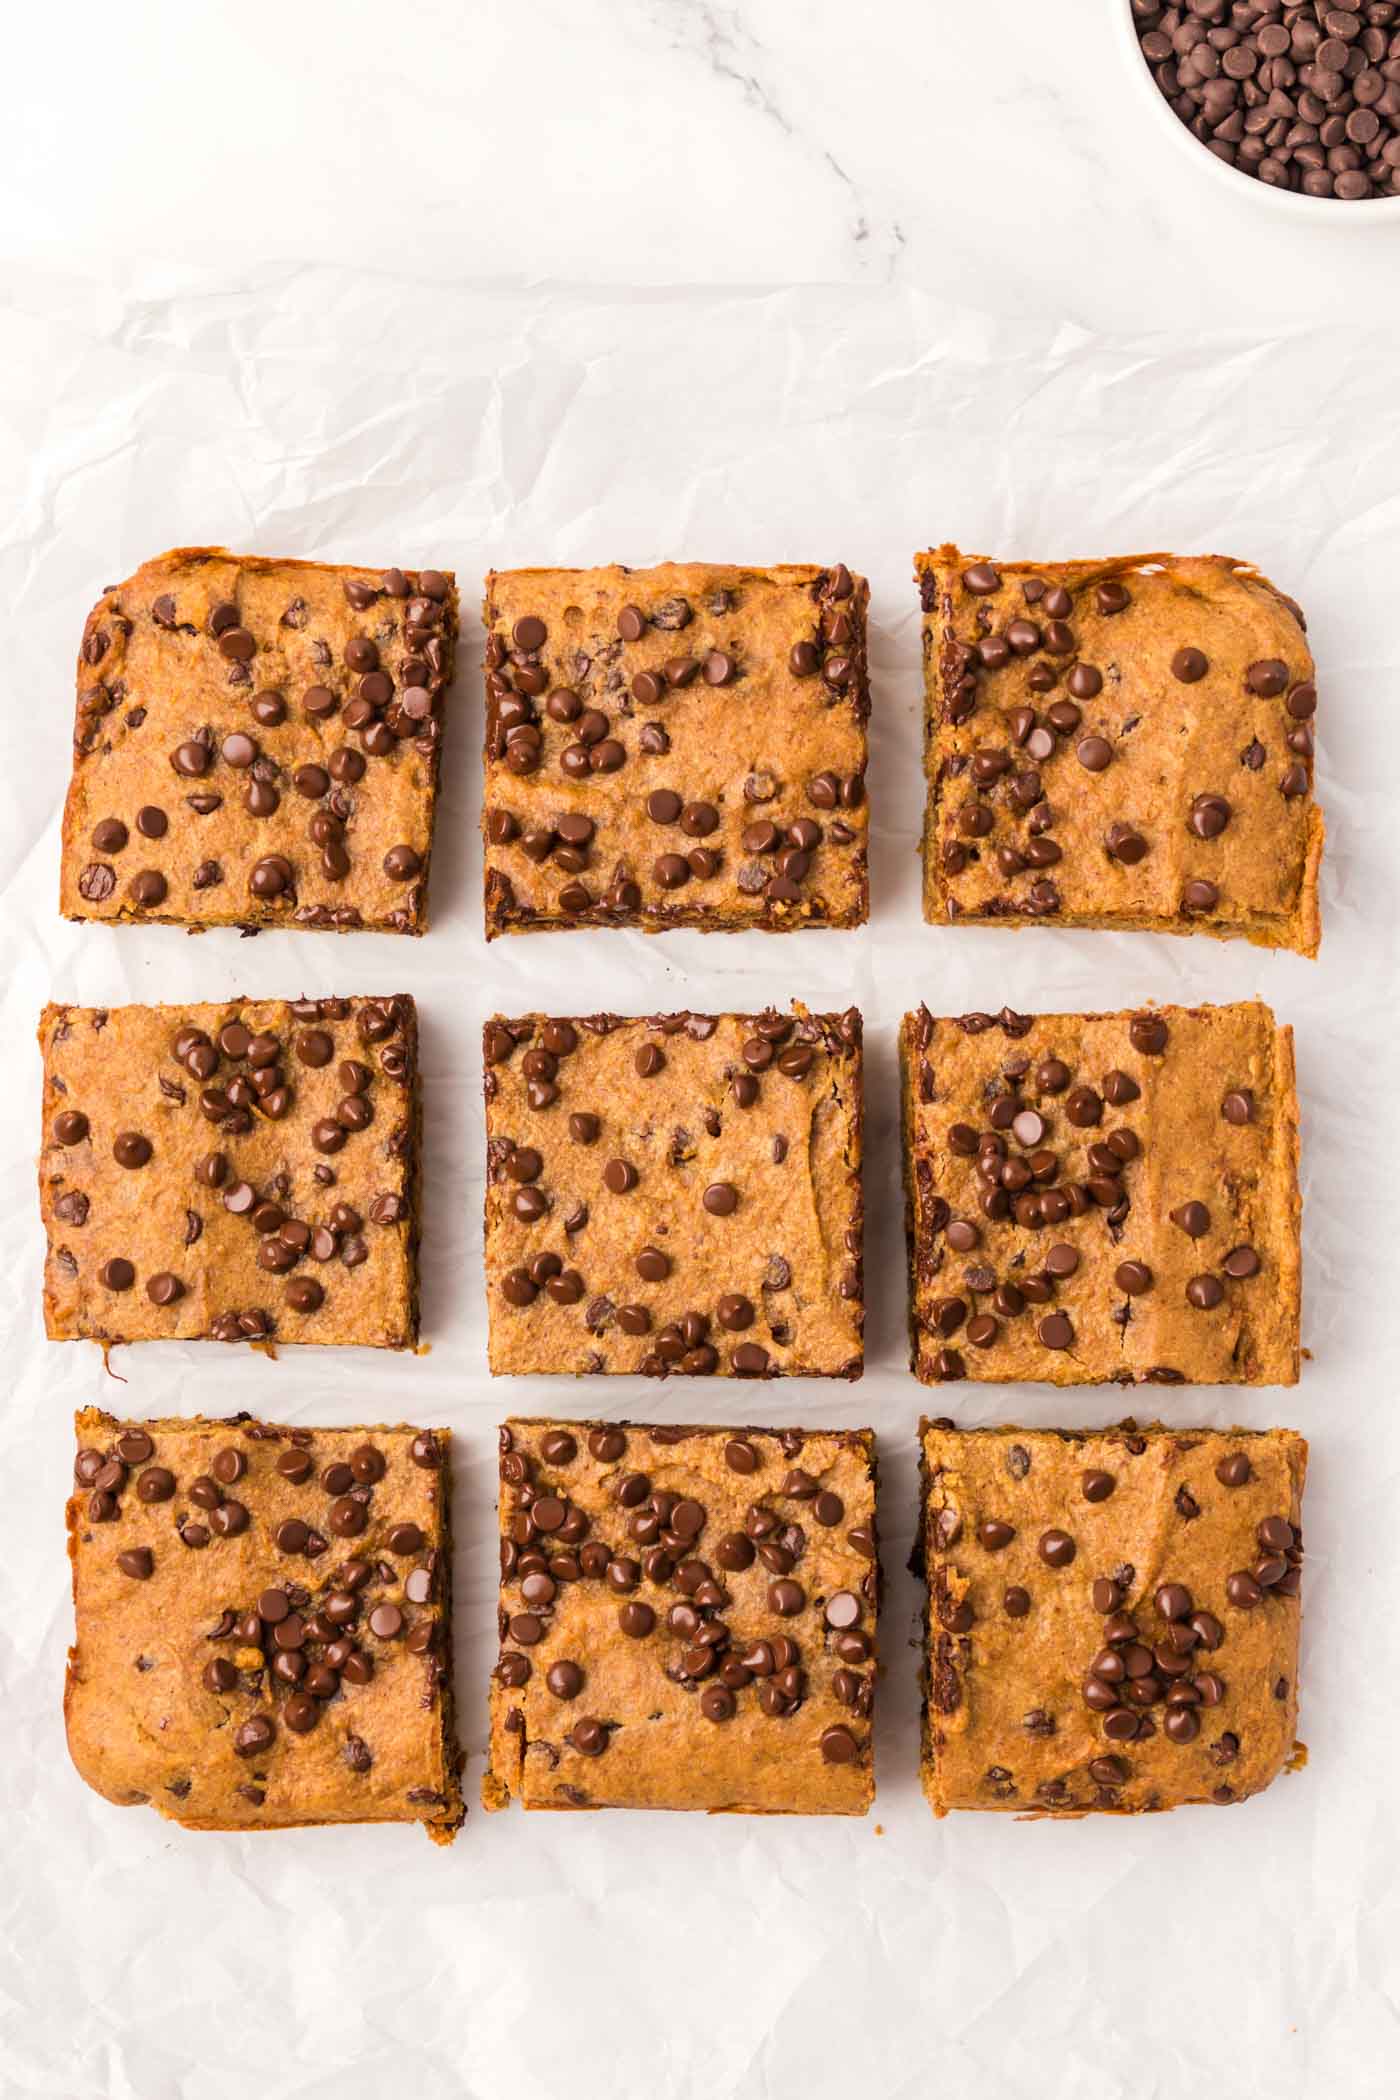 Baked pumpkin pie chocolate chip bars cut into 9 squares on a piece of parchment.